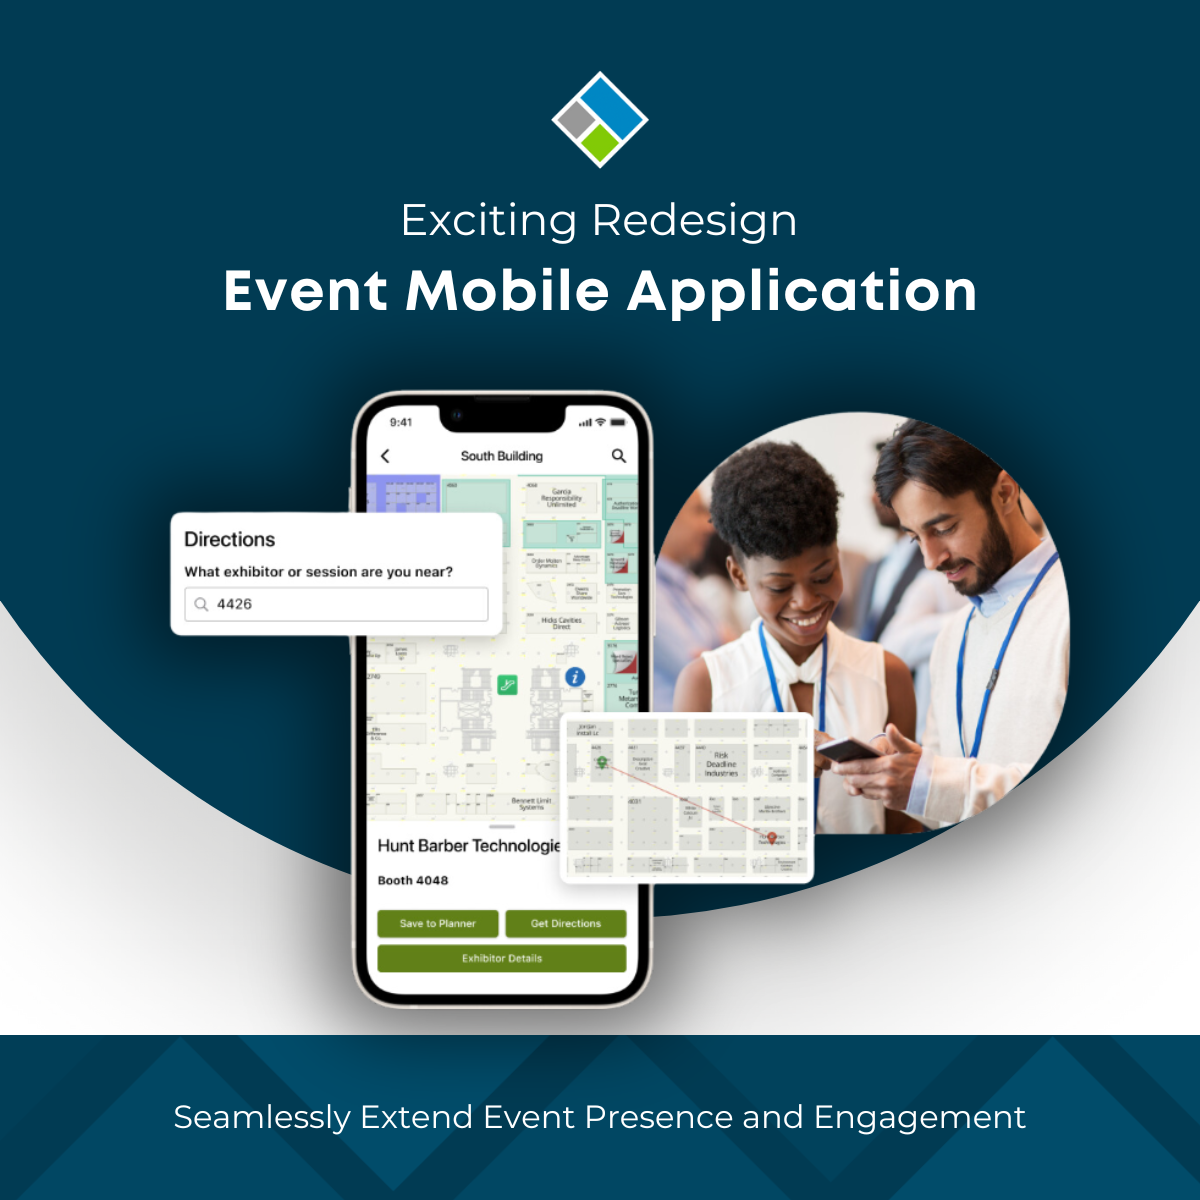 Map Your Show's Event Mobile App is back with an exciting redesign!